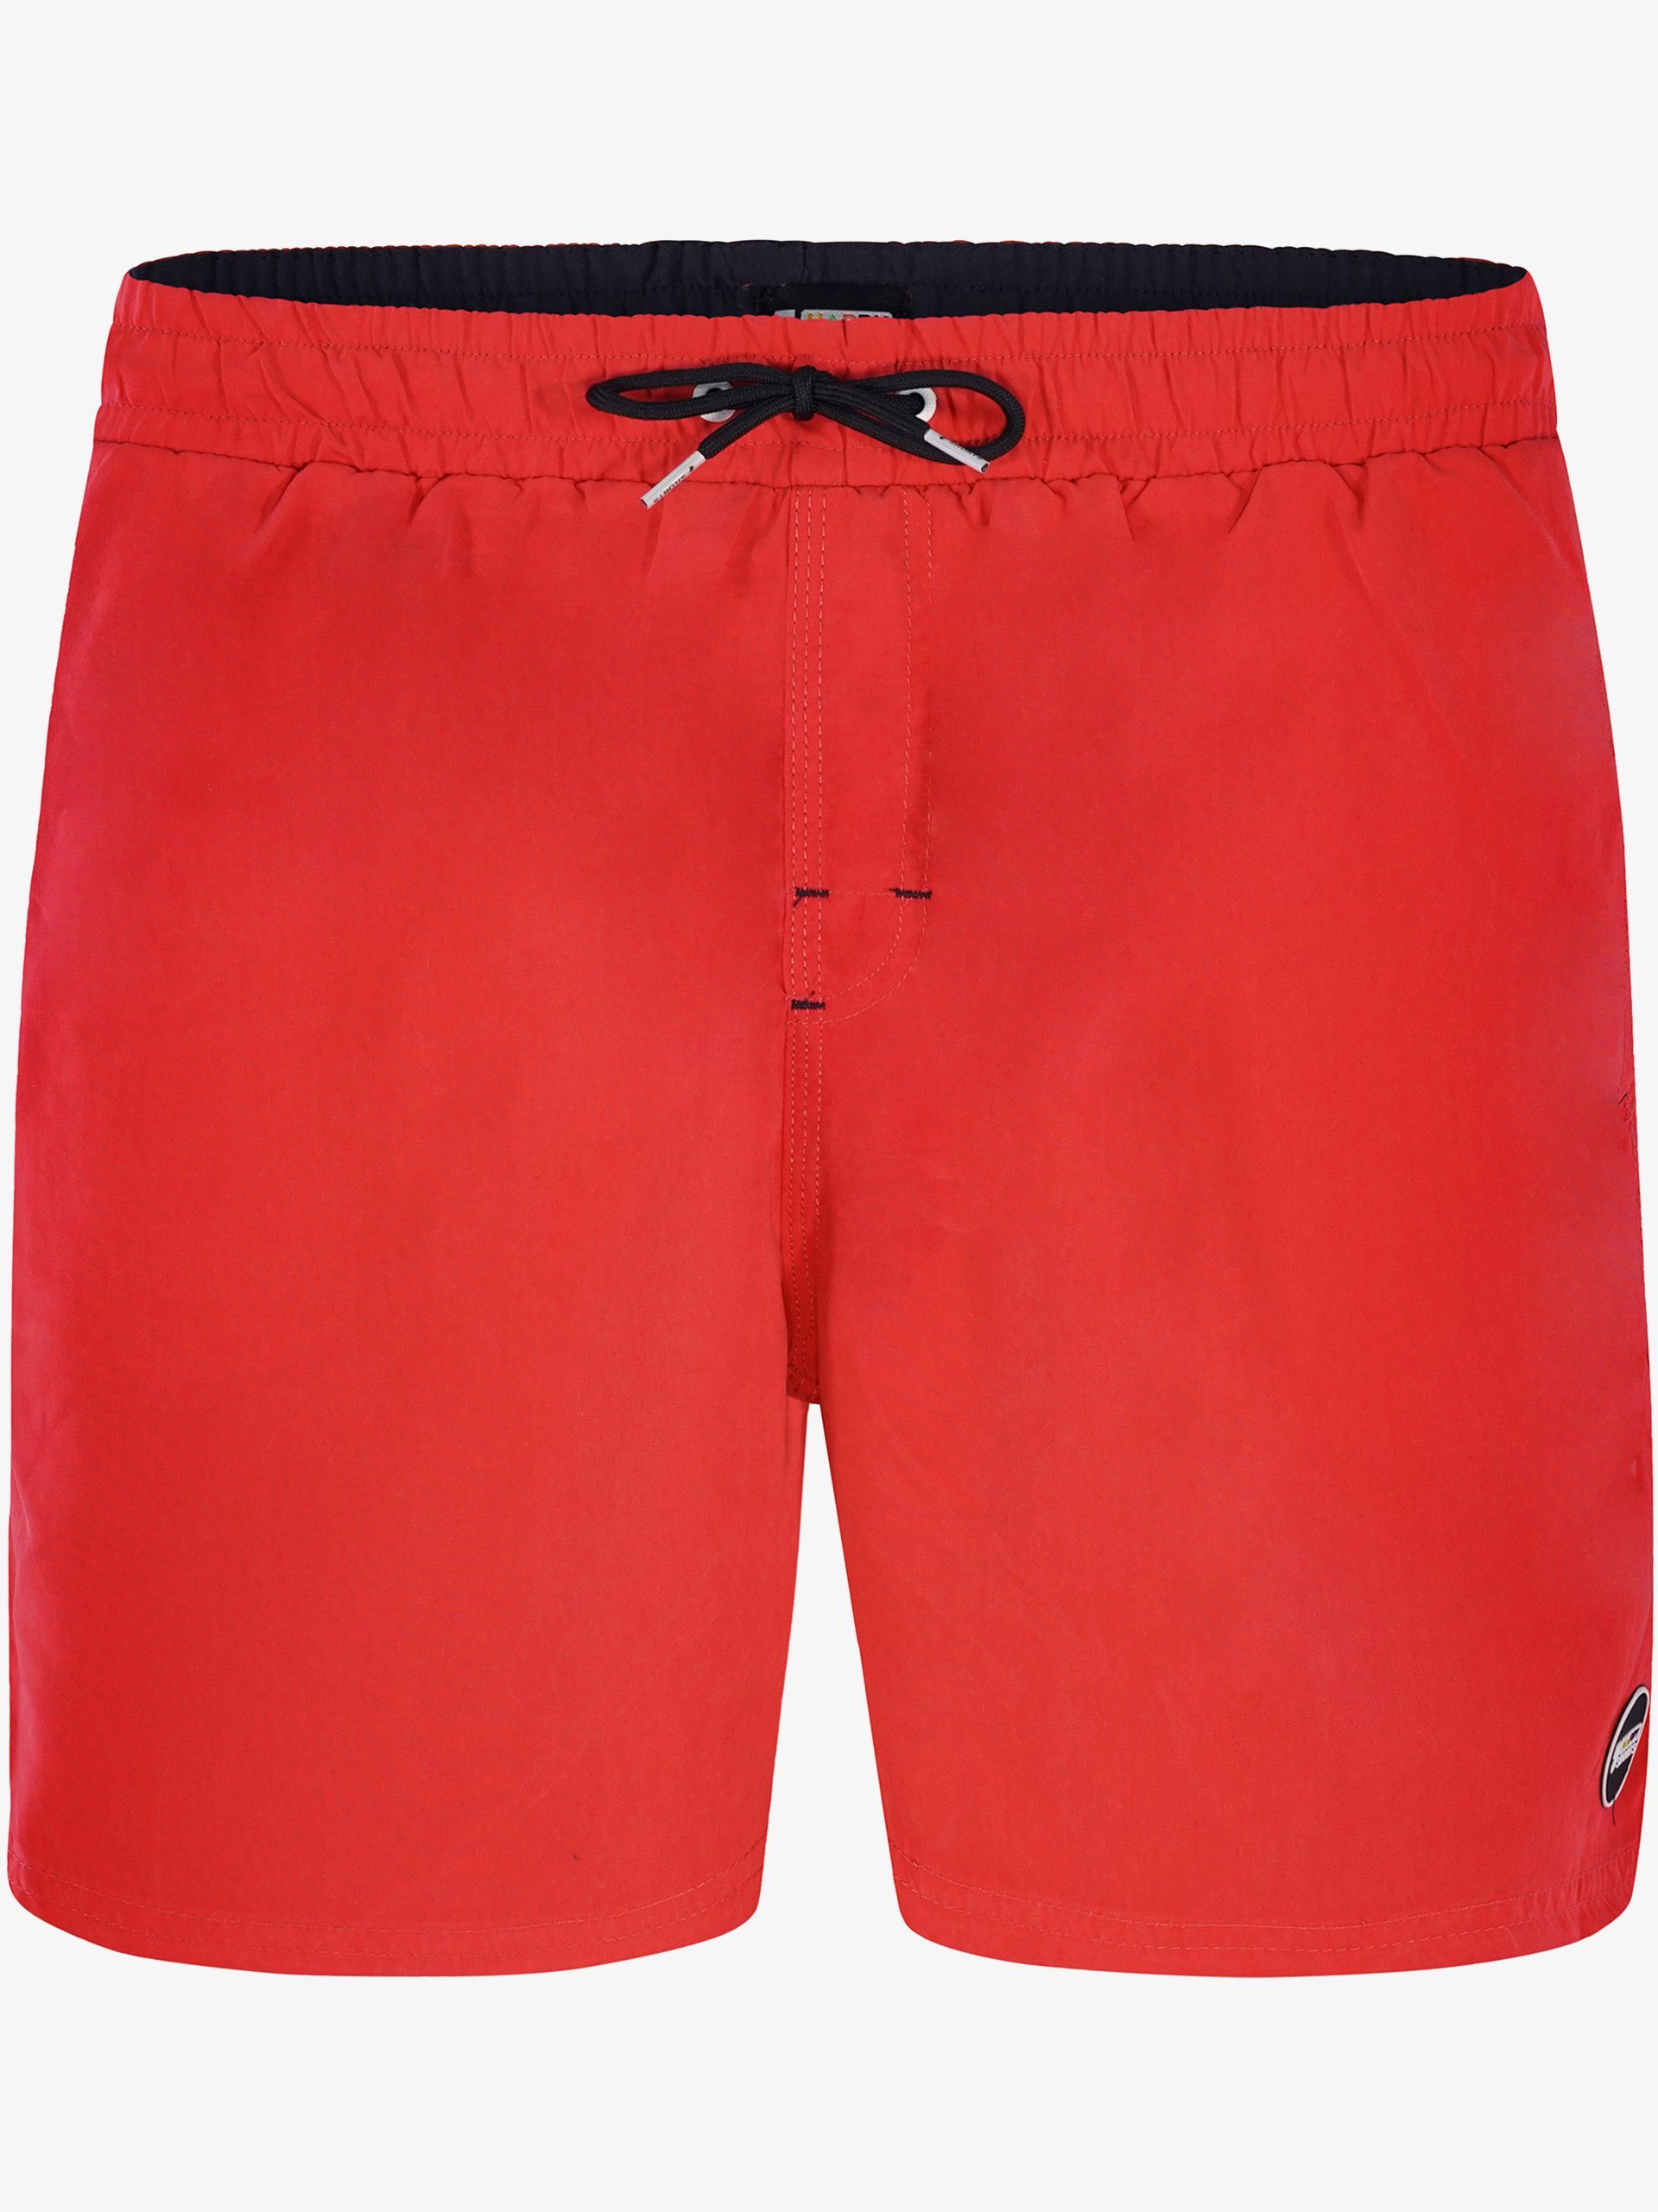 HAPPY SHORTS Badehose Simple Red